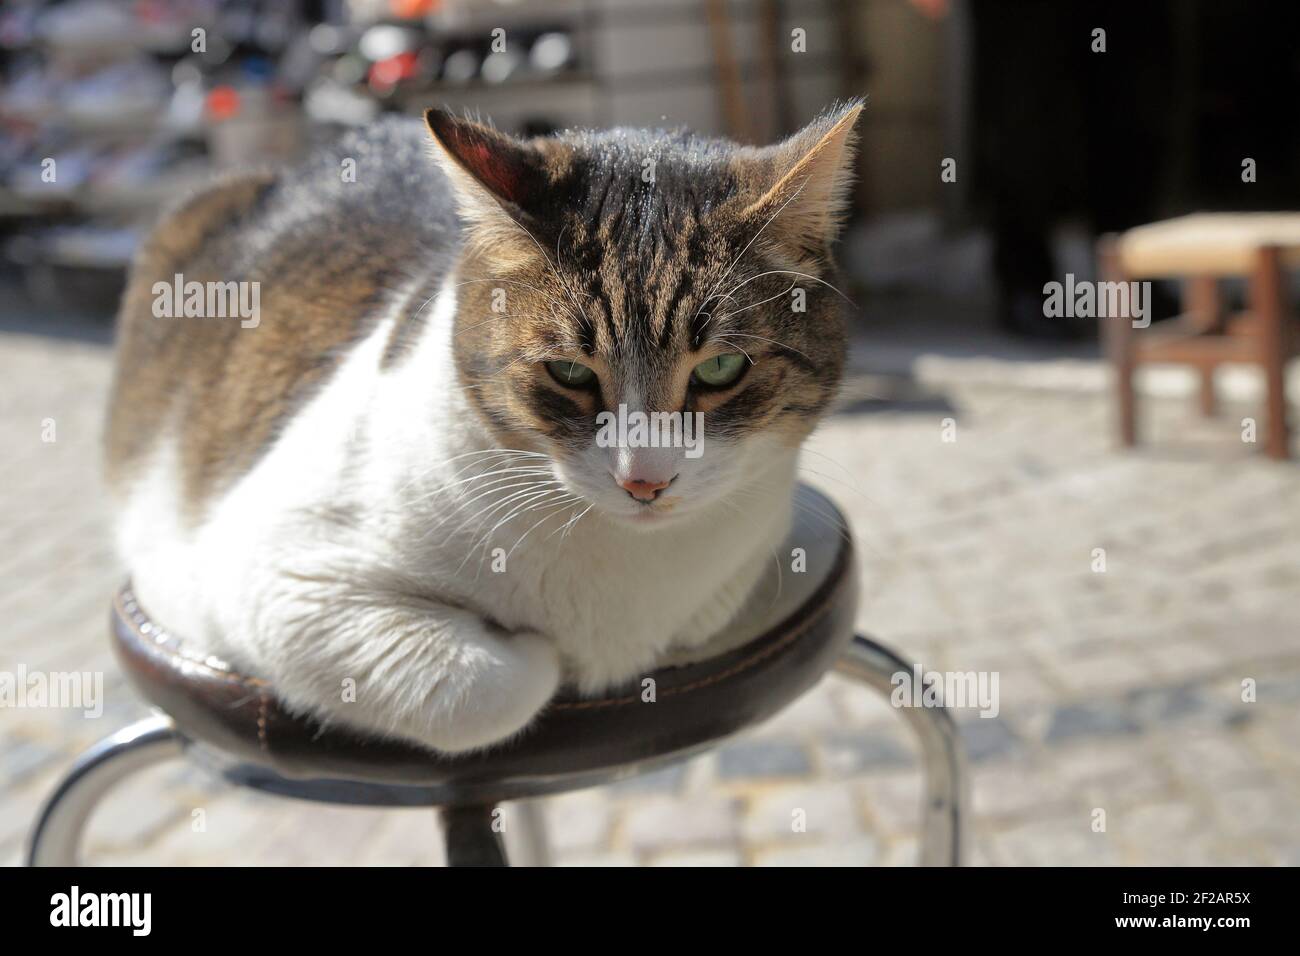 Obese tabby cat sitting at a stool outdoors in a sunny day in the middle of a cobblestone street. Stock Photo